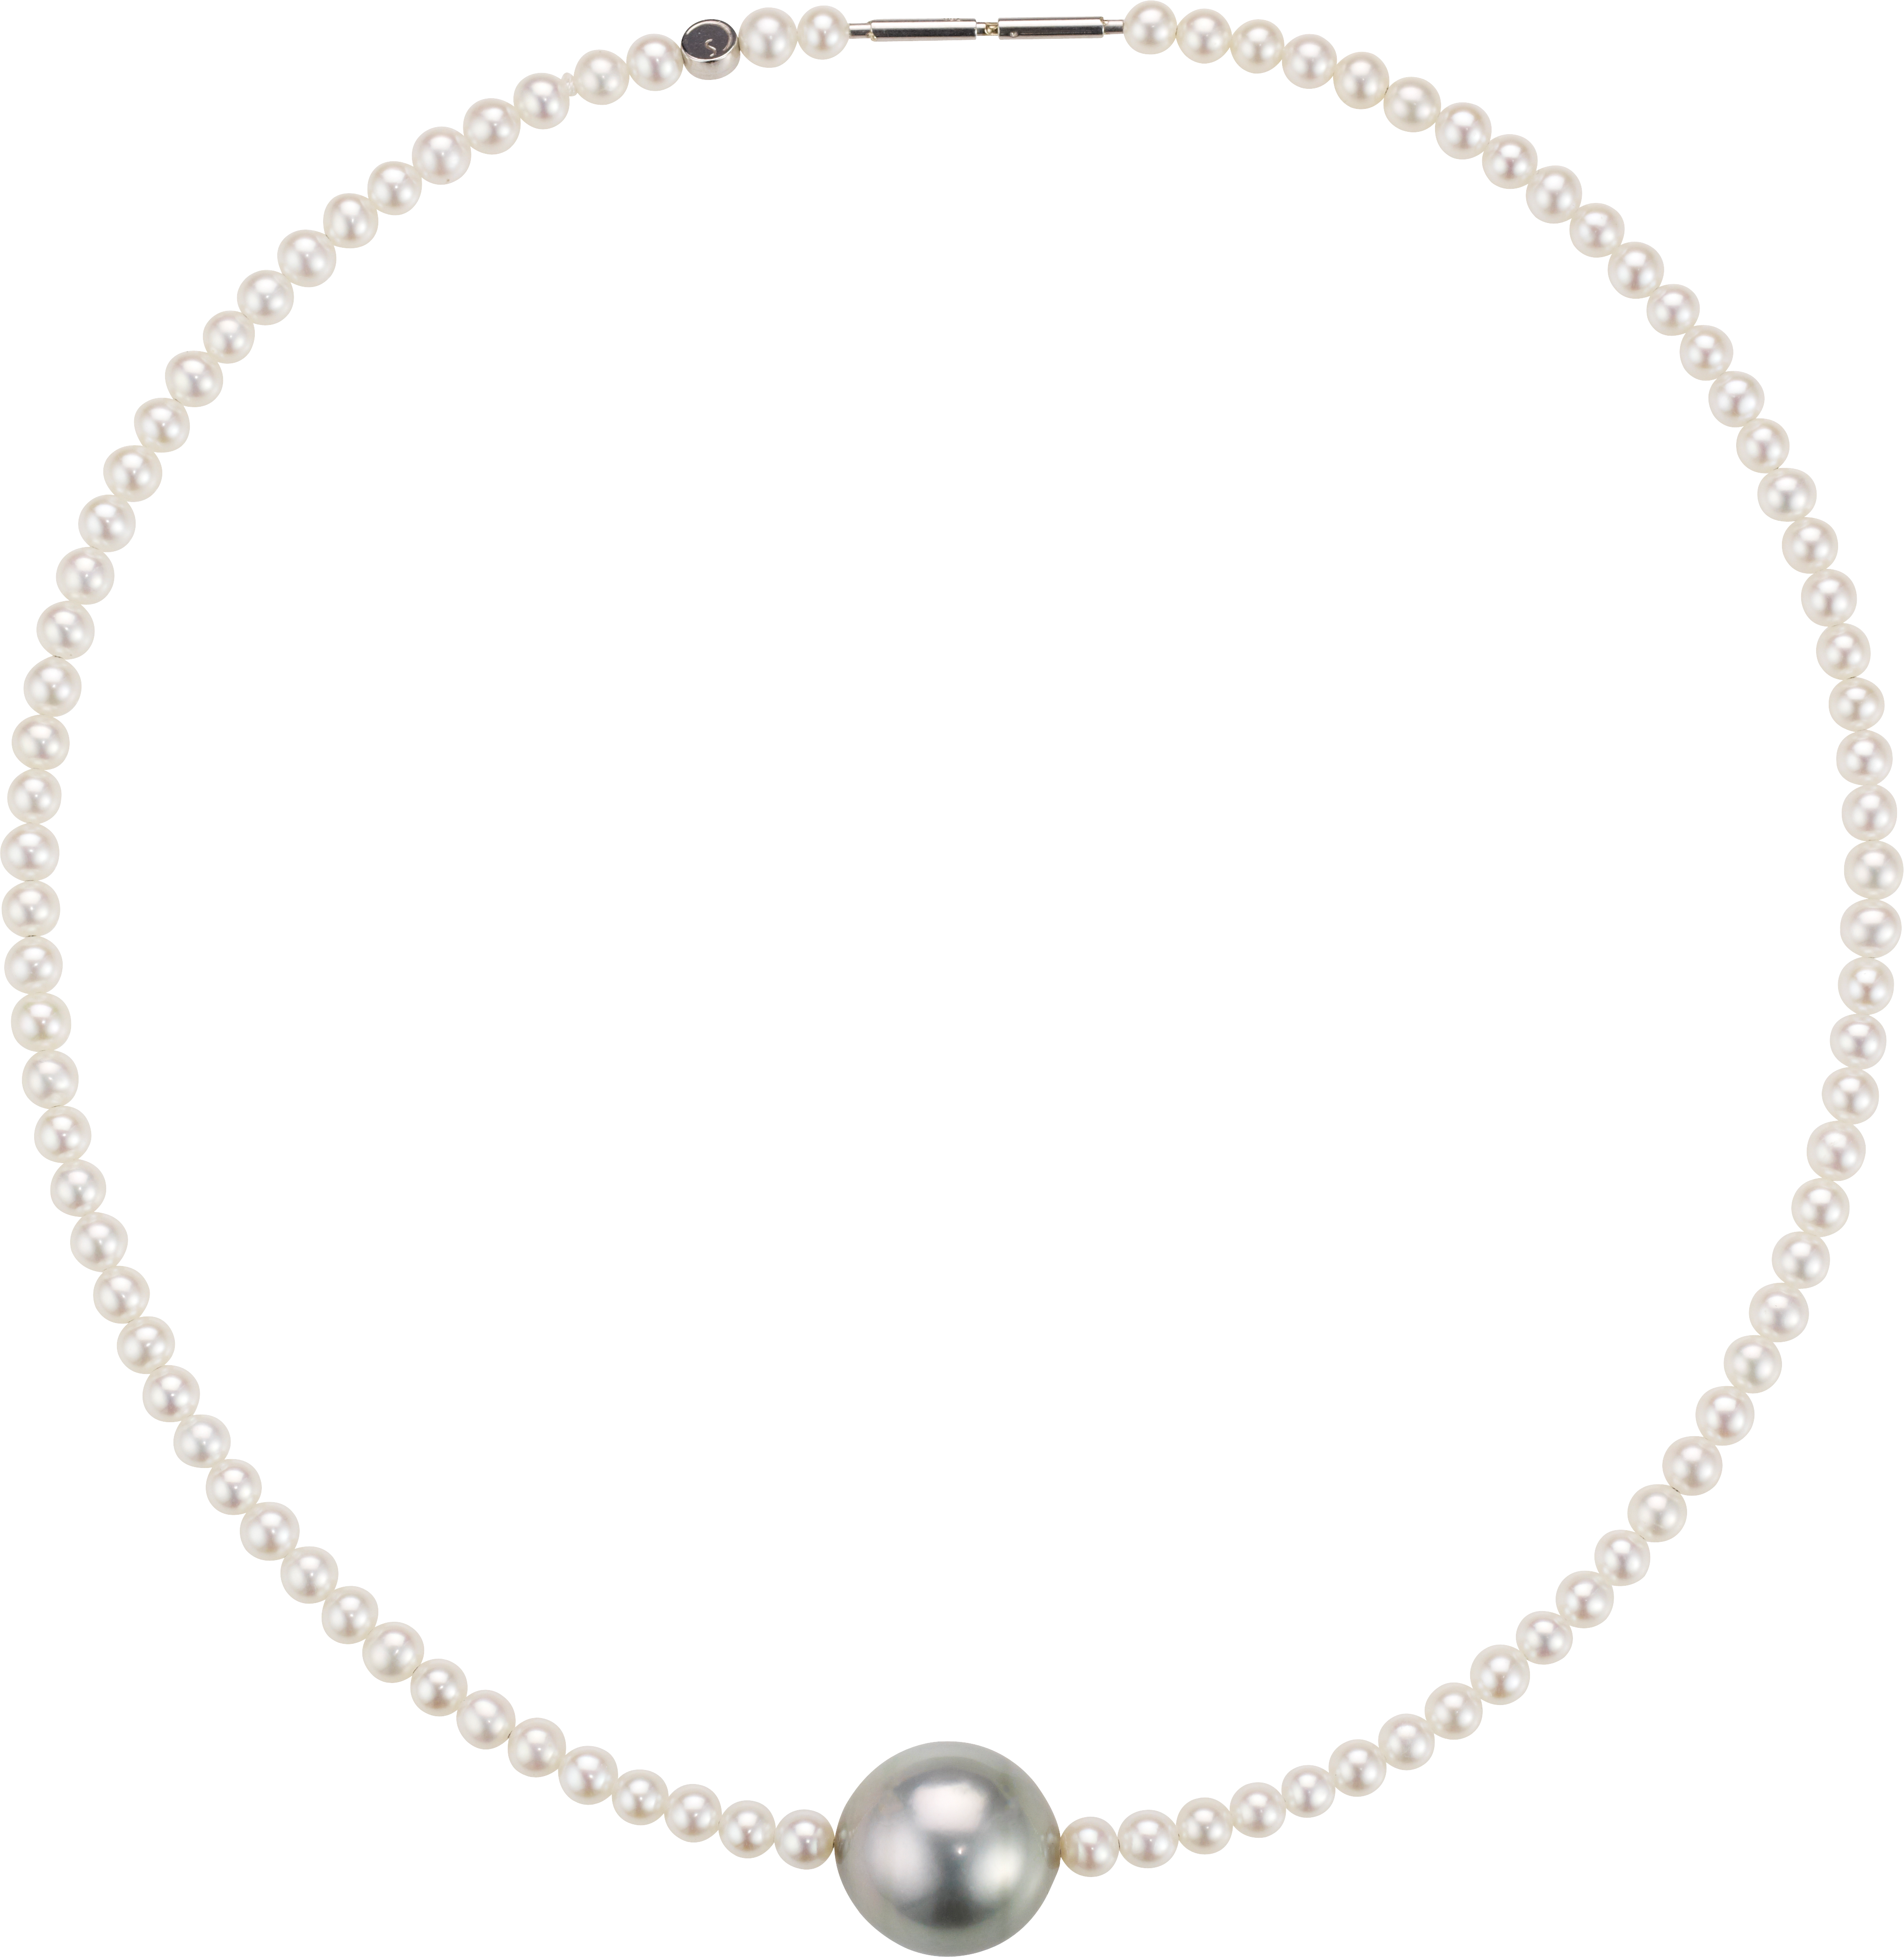 Necklace png images free. Pearls clipart strand